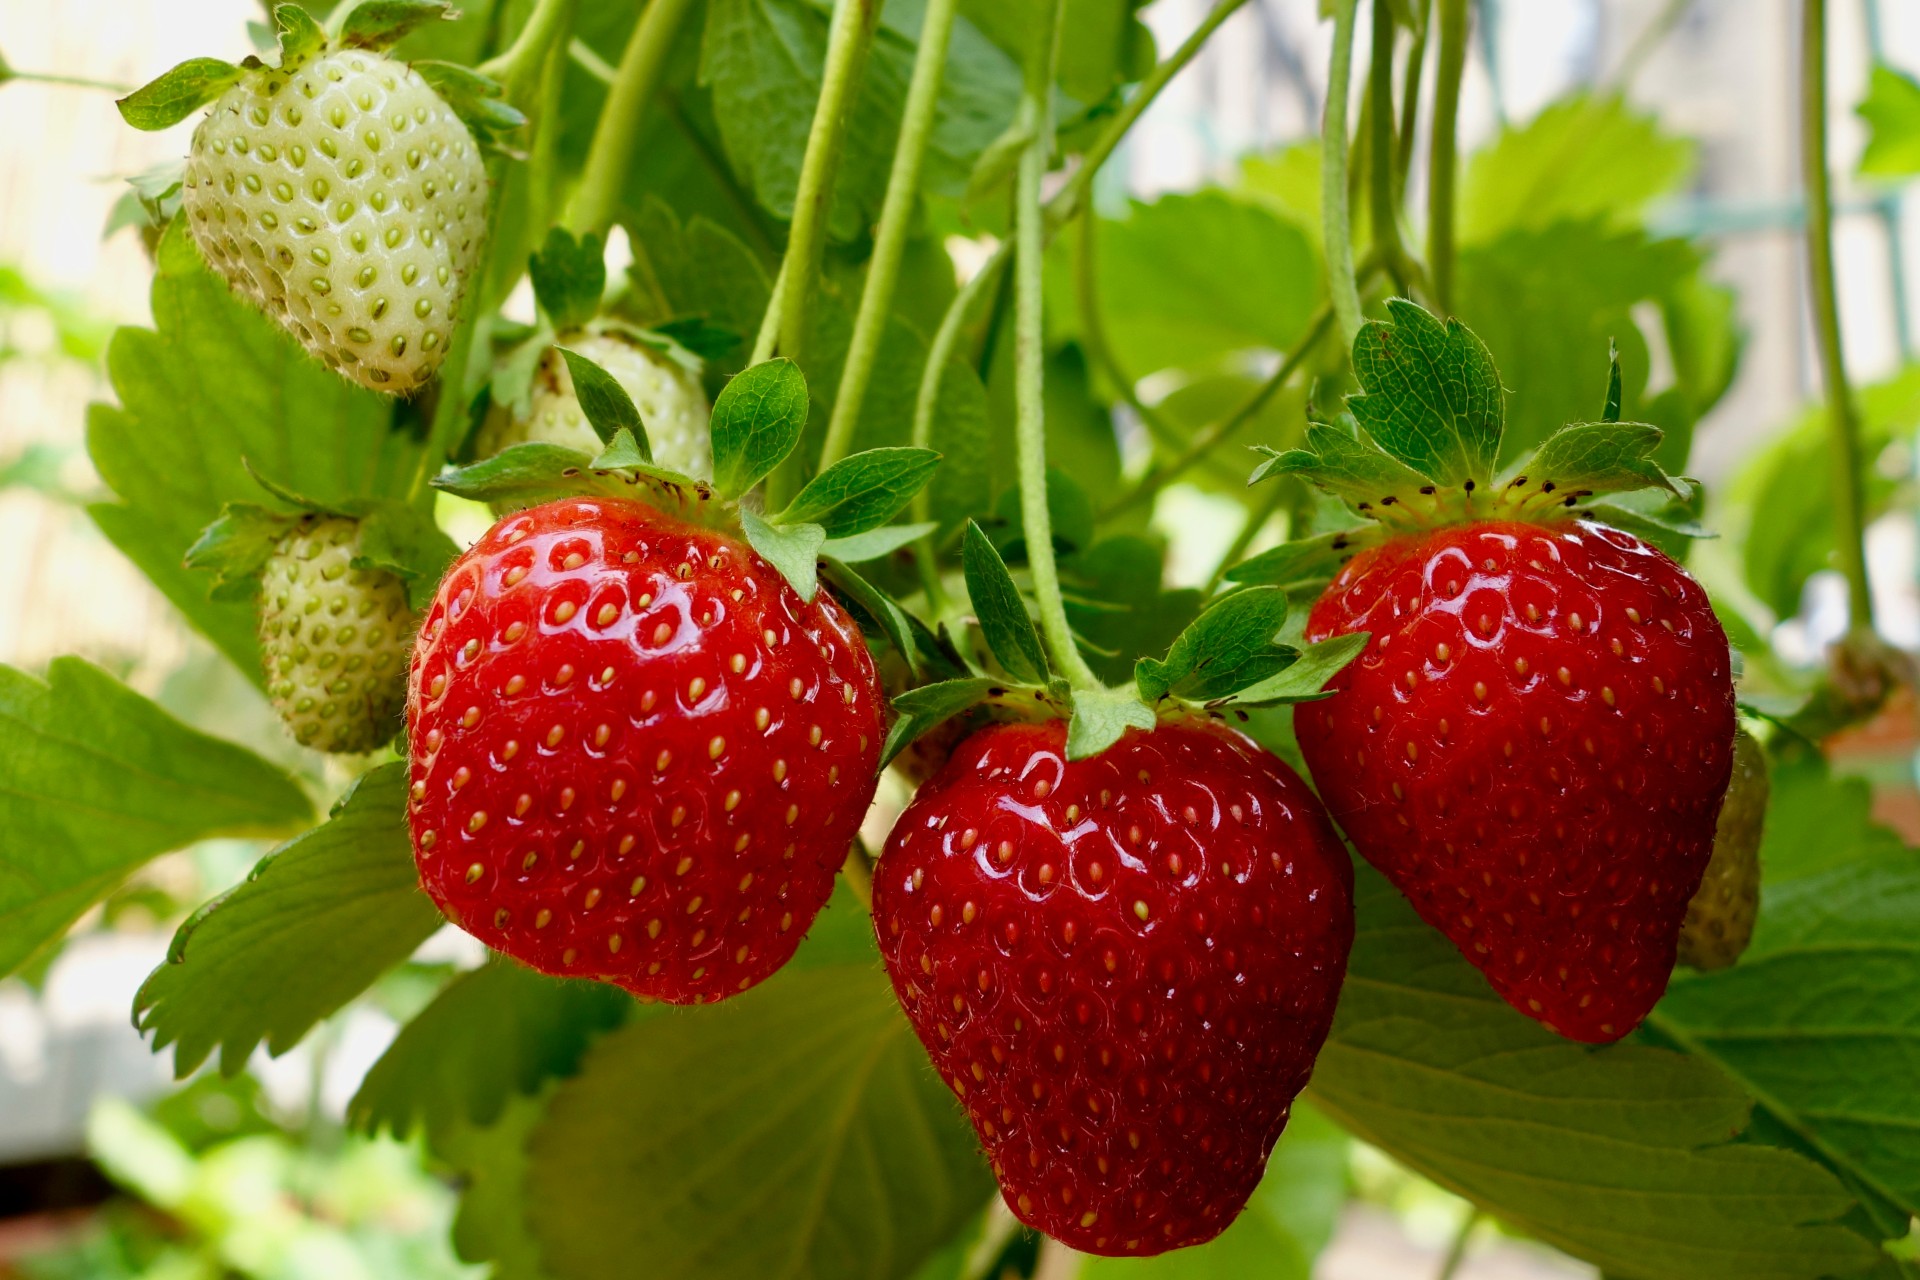  Find out exactly when you should actually go strawberry picking